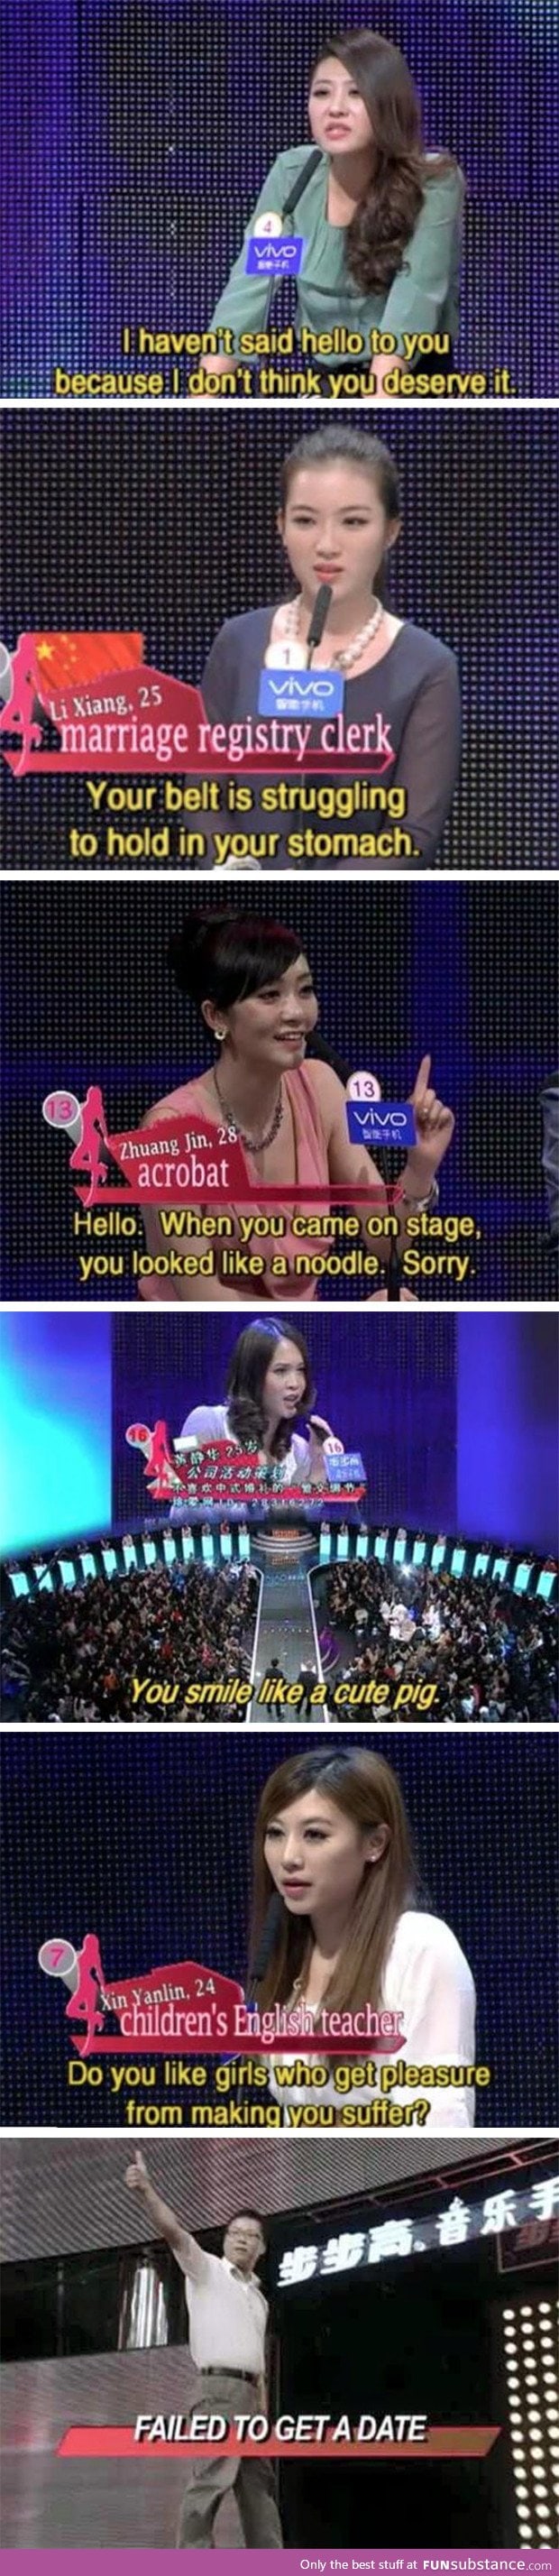 Chinese dating show